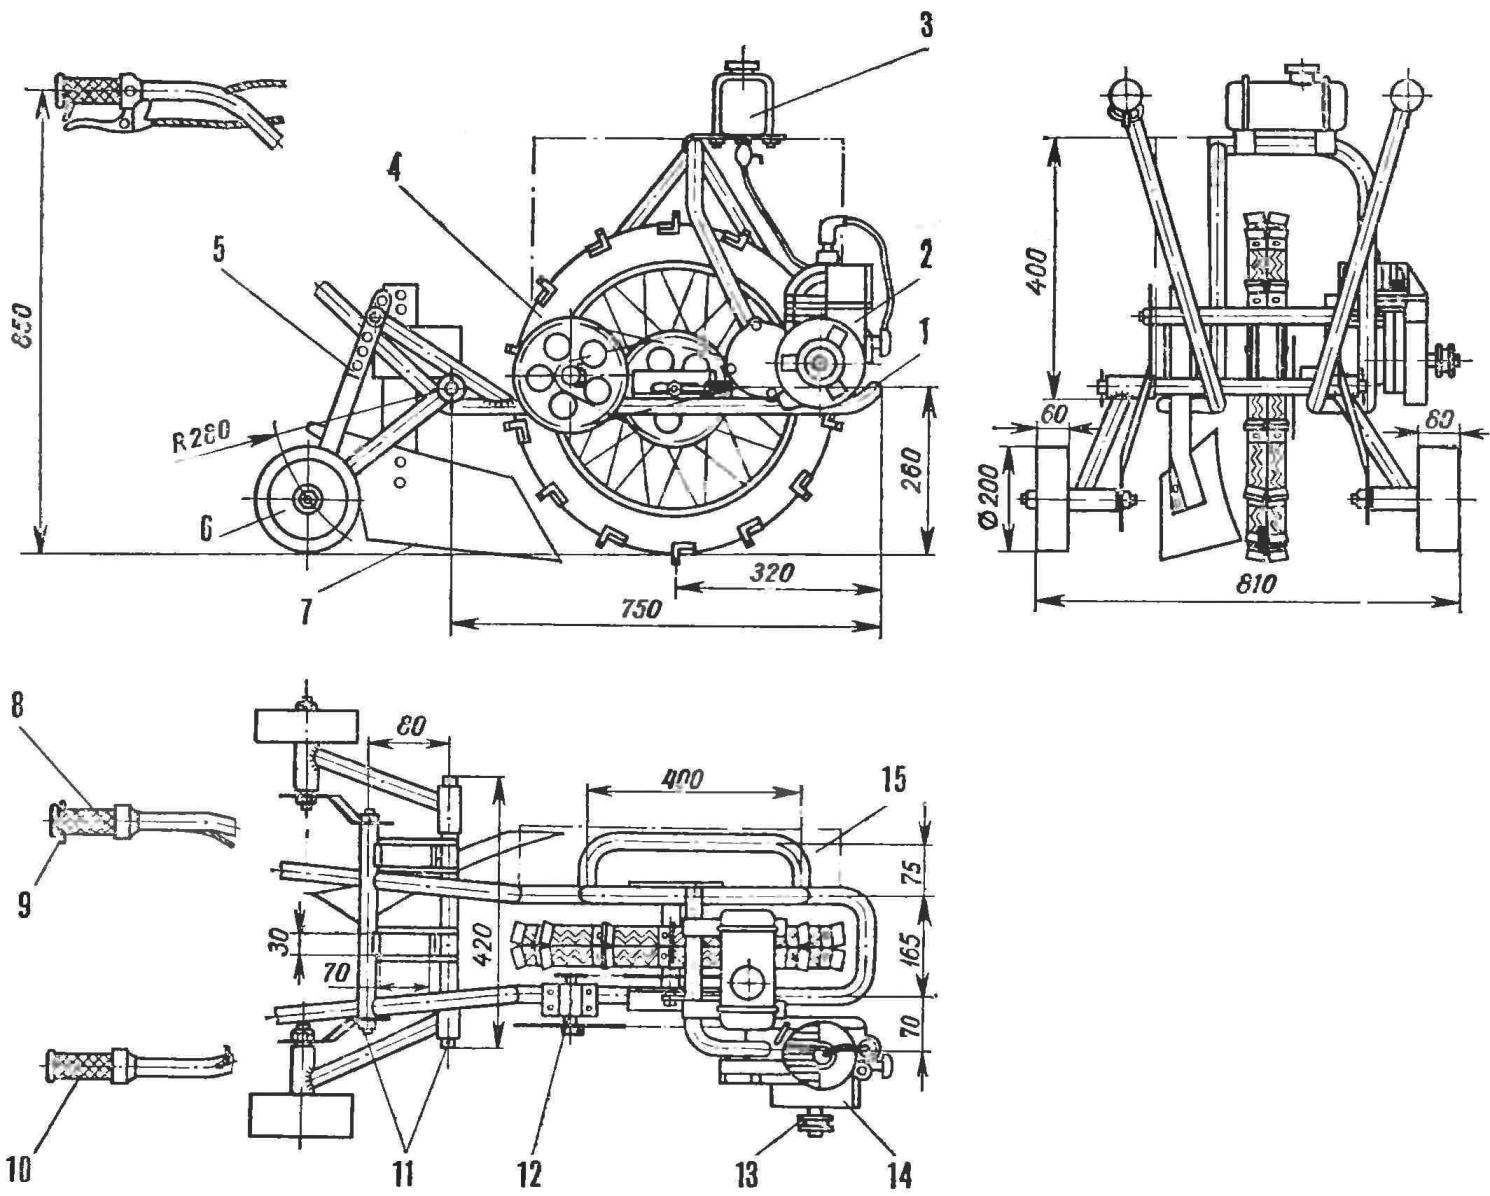 Fig. 1. The layout of the motor-plow